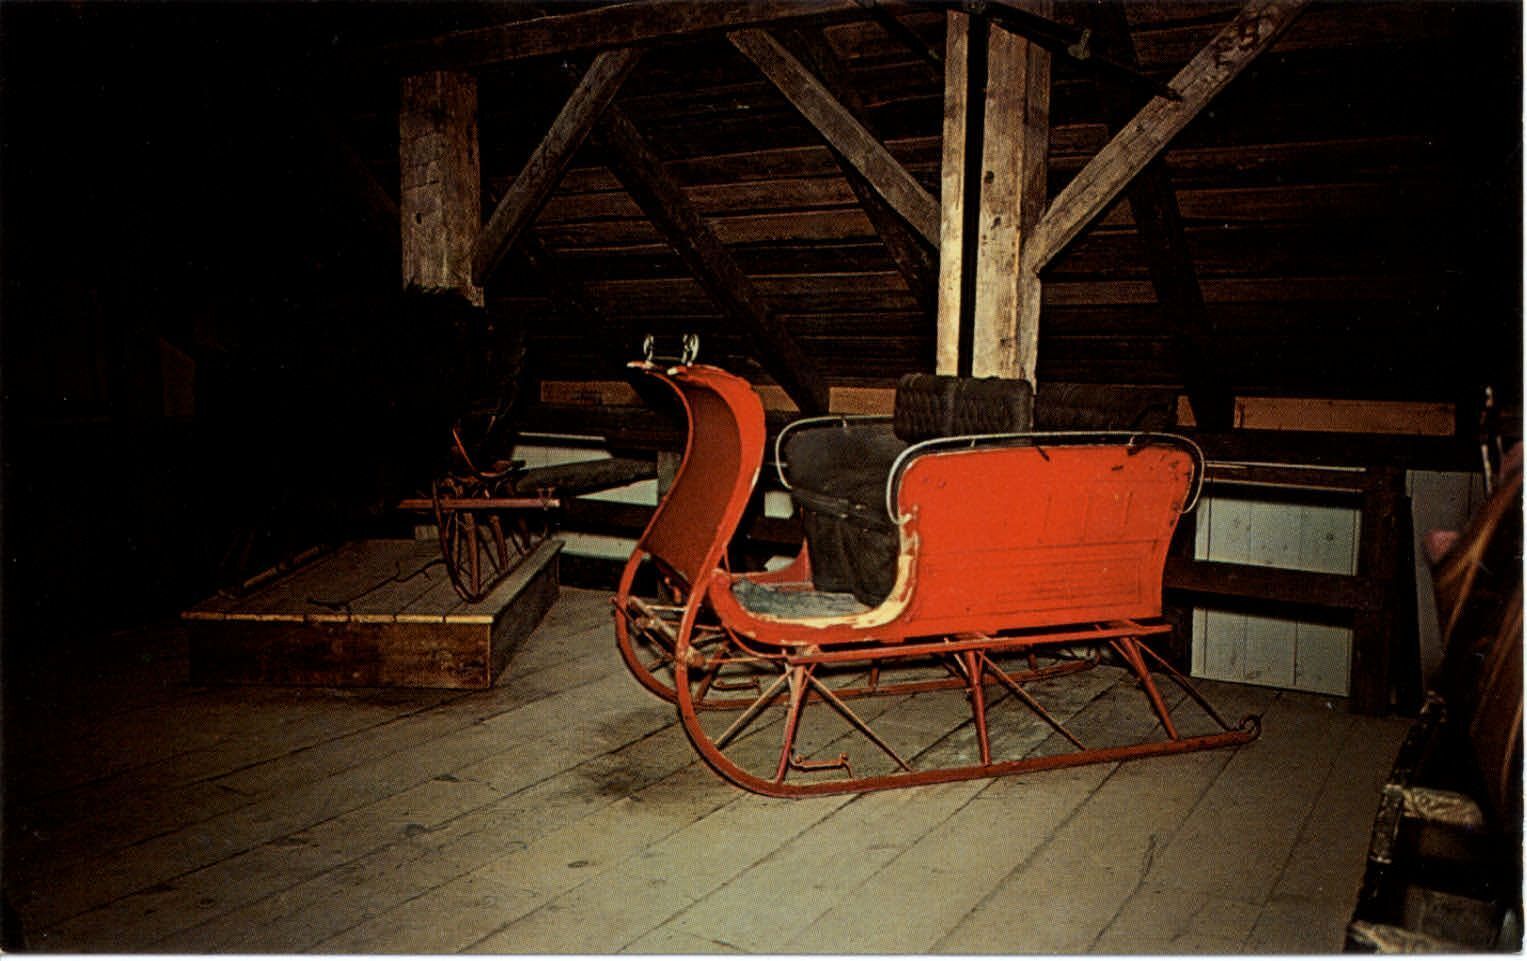 Sleigh Historic Old Vehicles Museum Cornwall Crysler Farm Ontario Canada 1960s